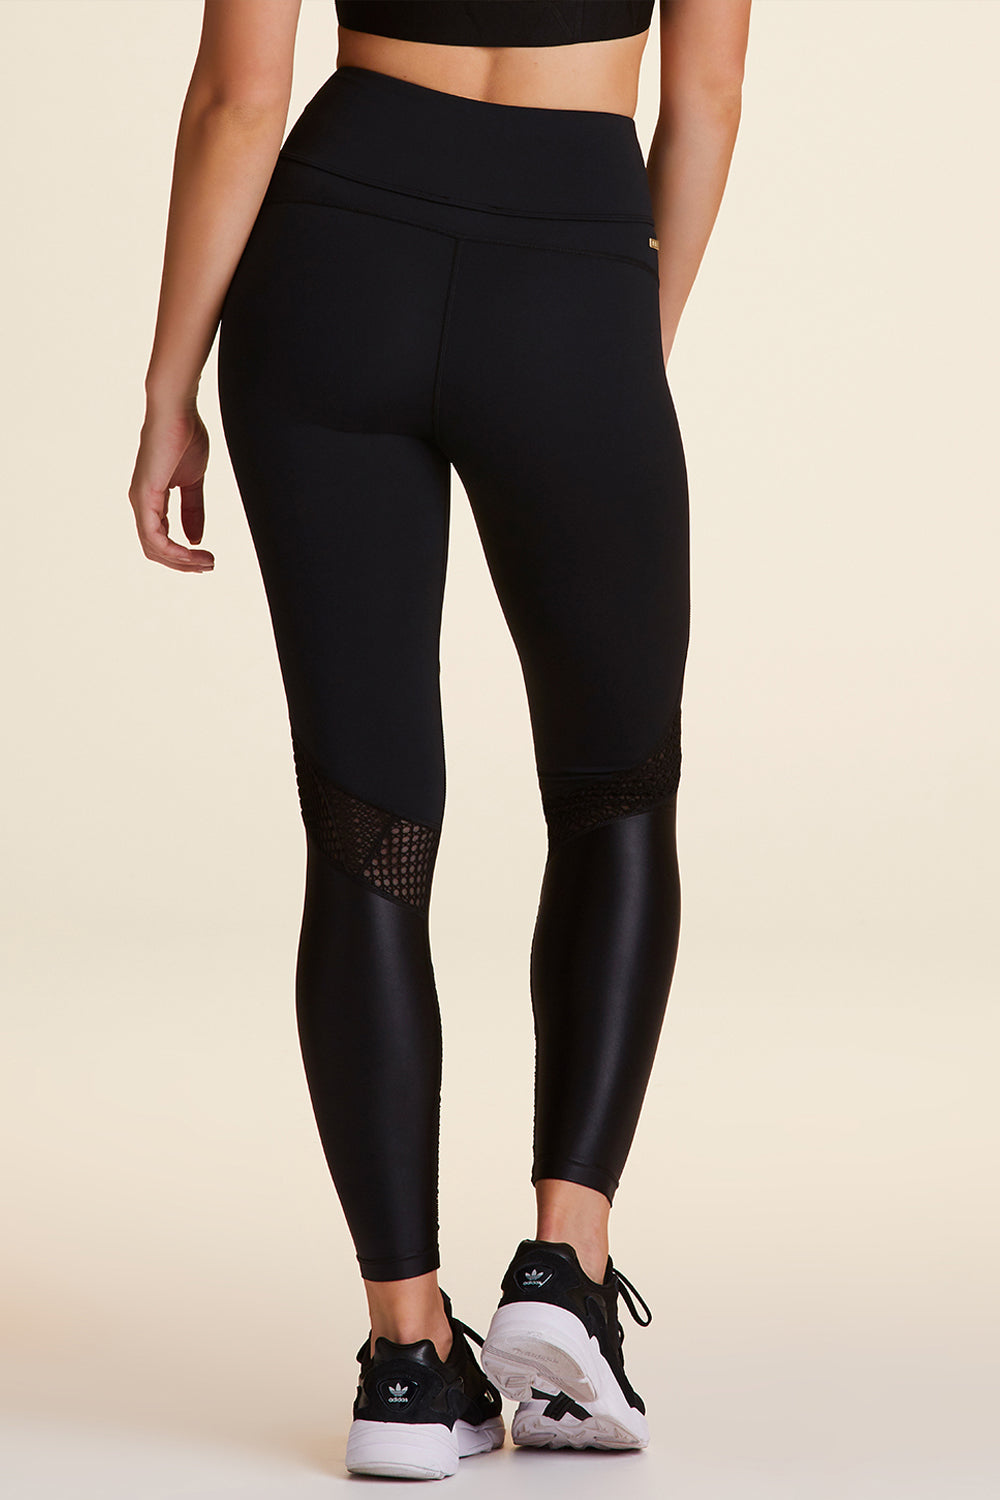 Back view of Alala Luxury Women's Athleisure collage tight in black